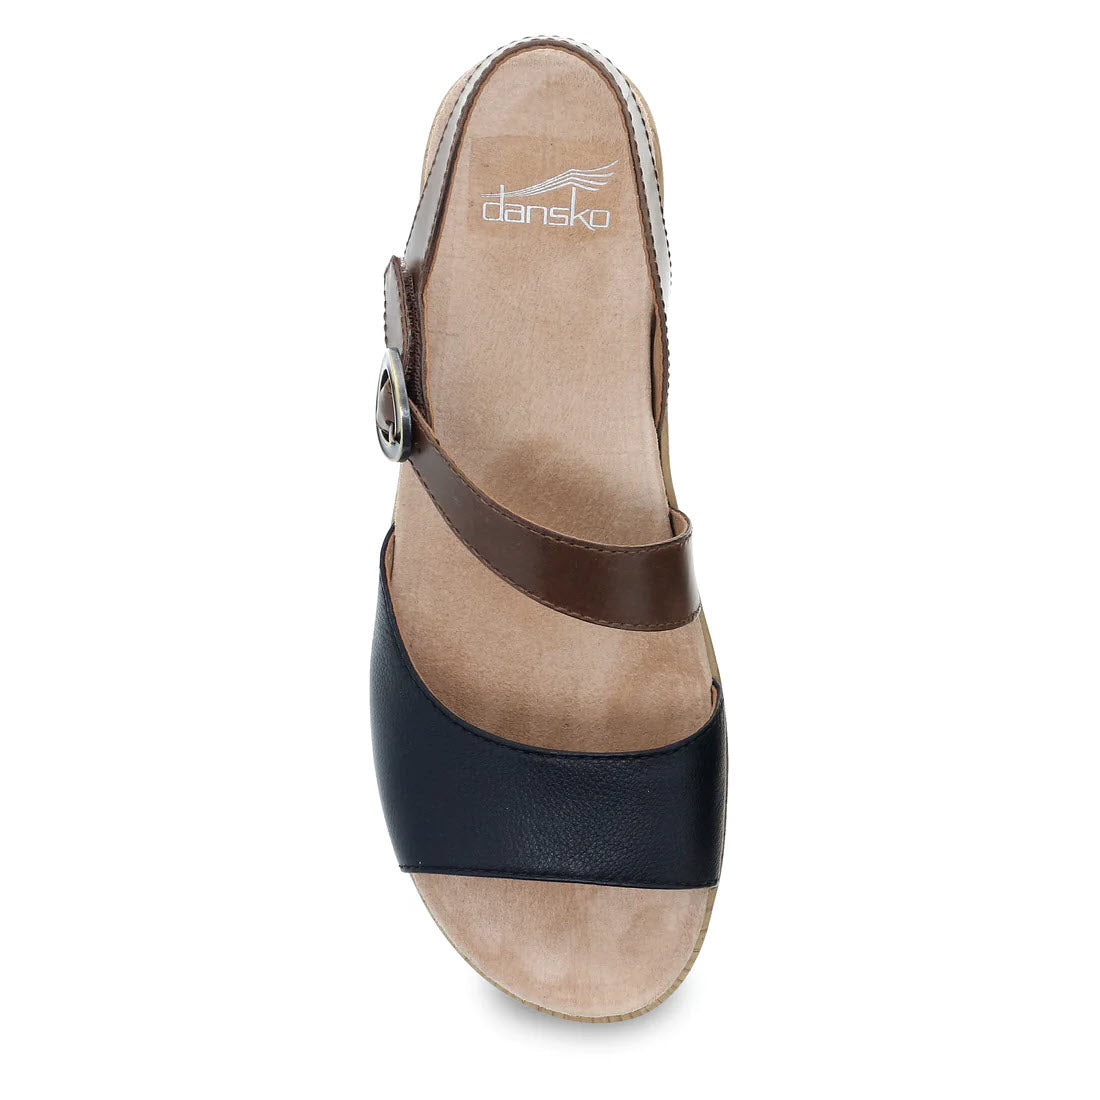 Top view of a two-tone Dansko Marjory Black Nappa sandal with asymmetrical brown and black leather straps and a circular buckle.